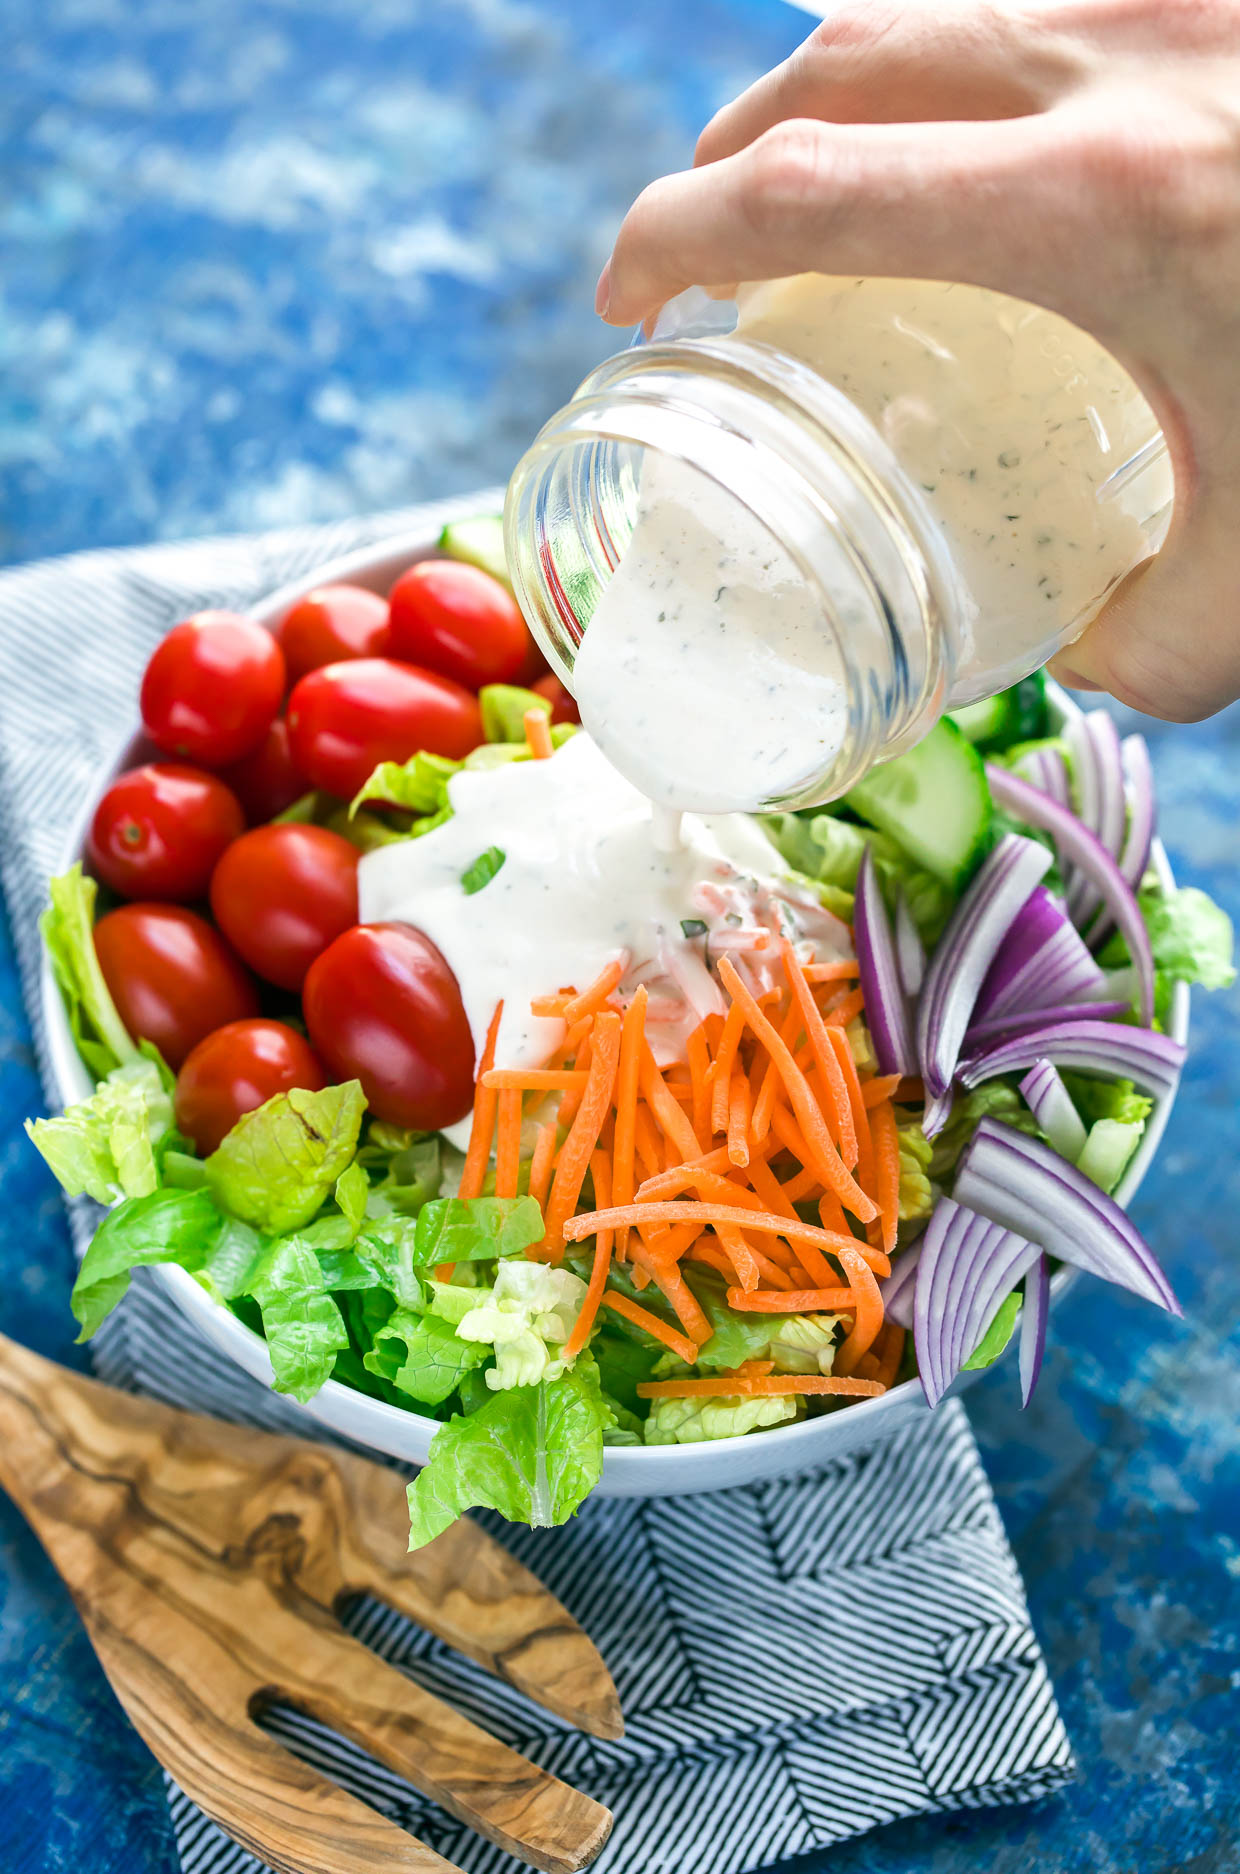 Ditch the sketchy processed bottled dressing and whip up this super quick, super easy, homemade paleo ranch dressing! Whole30 Compliant + Gluten-Free